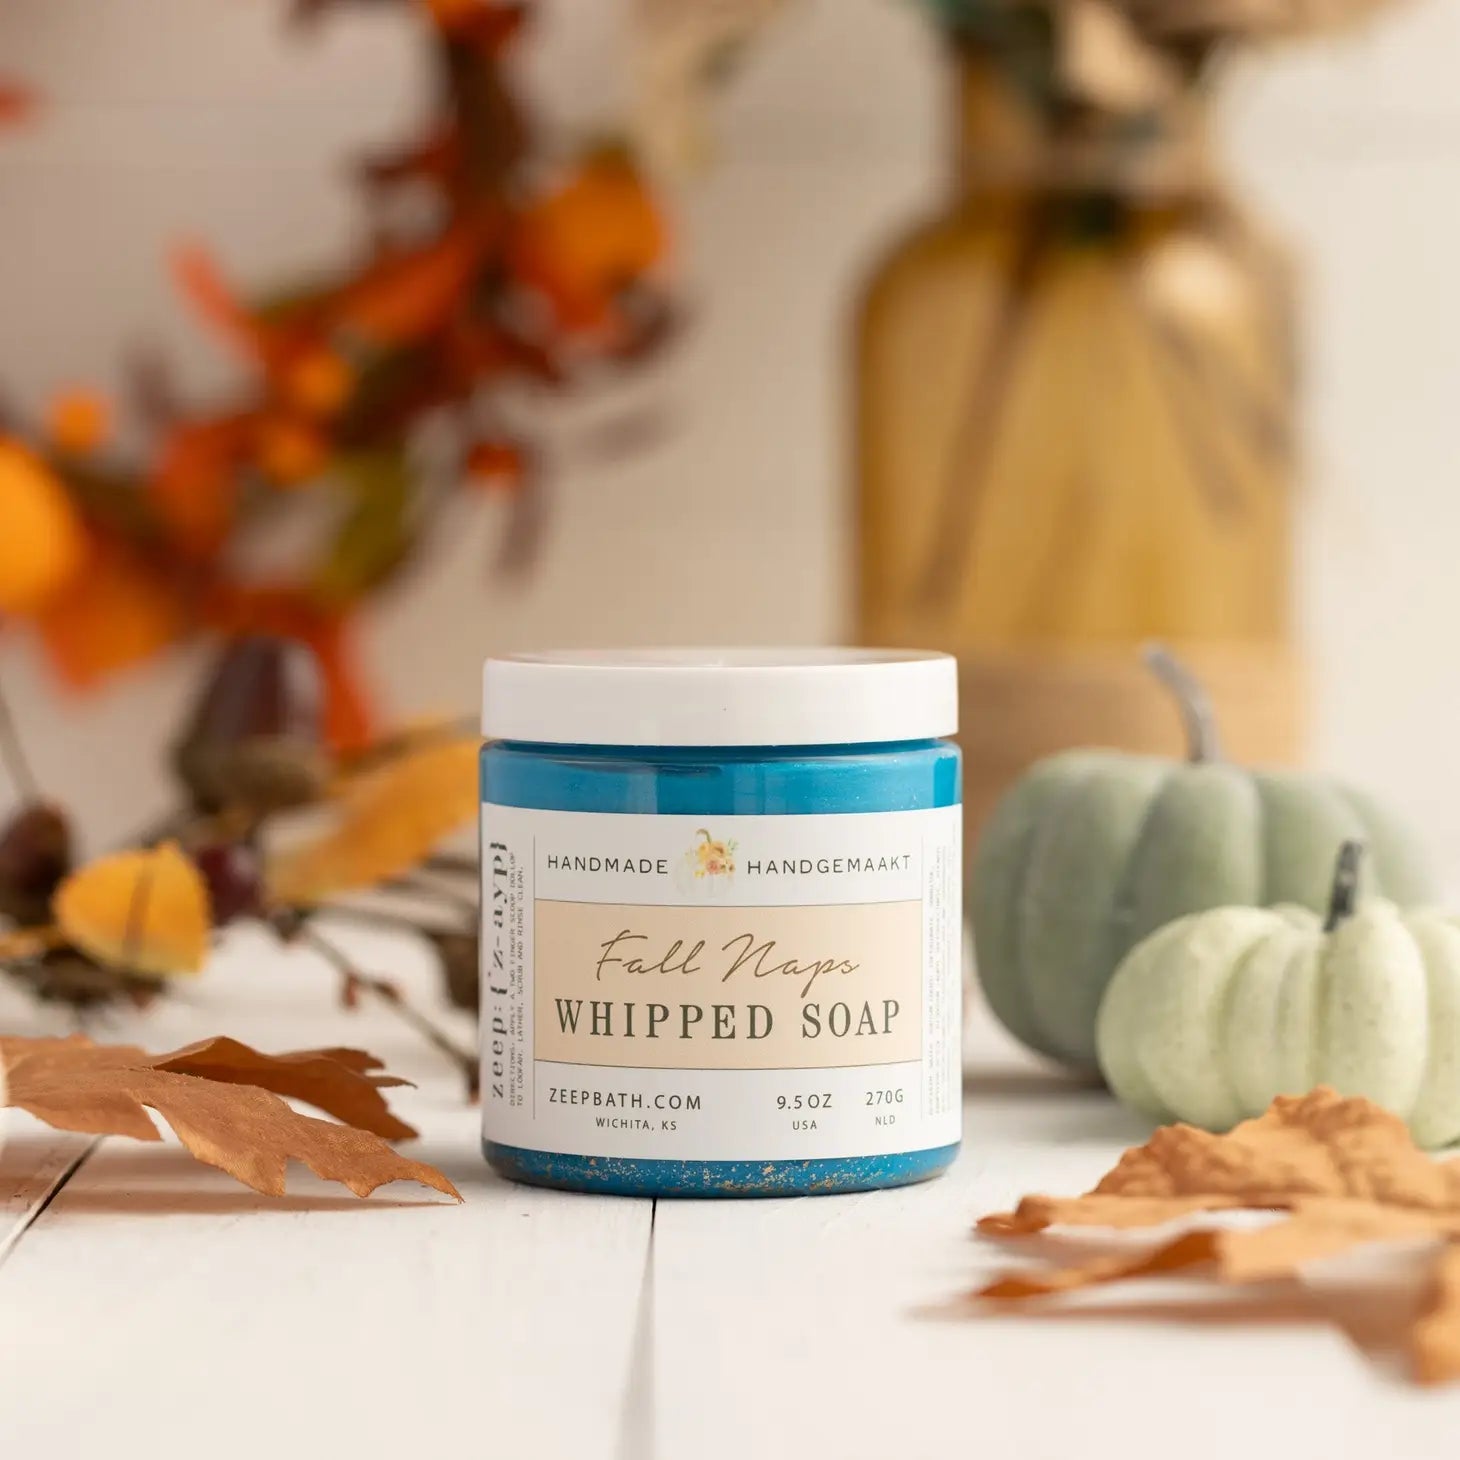 Fall Naps Whipped Soap